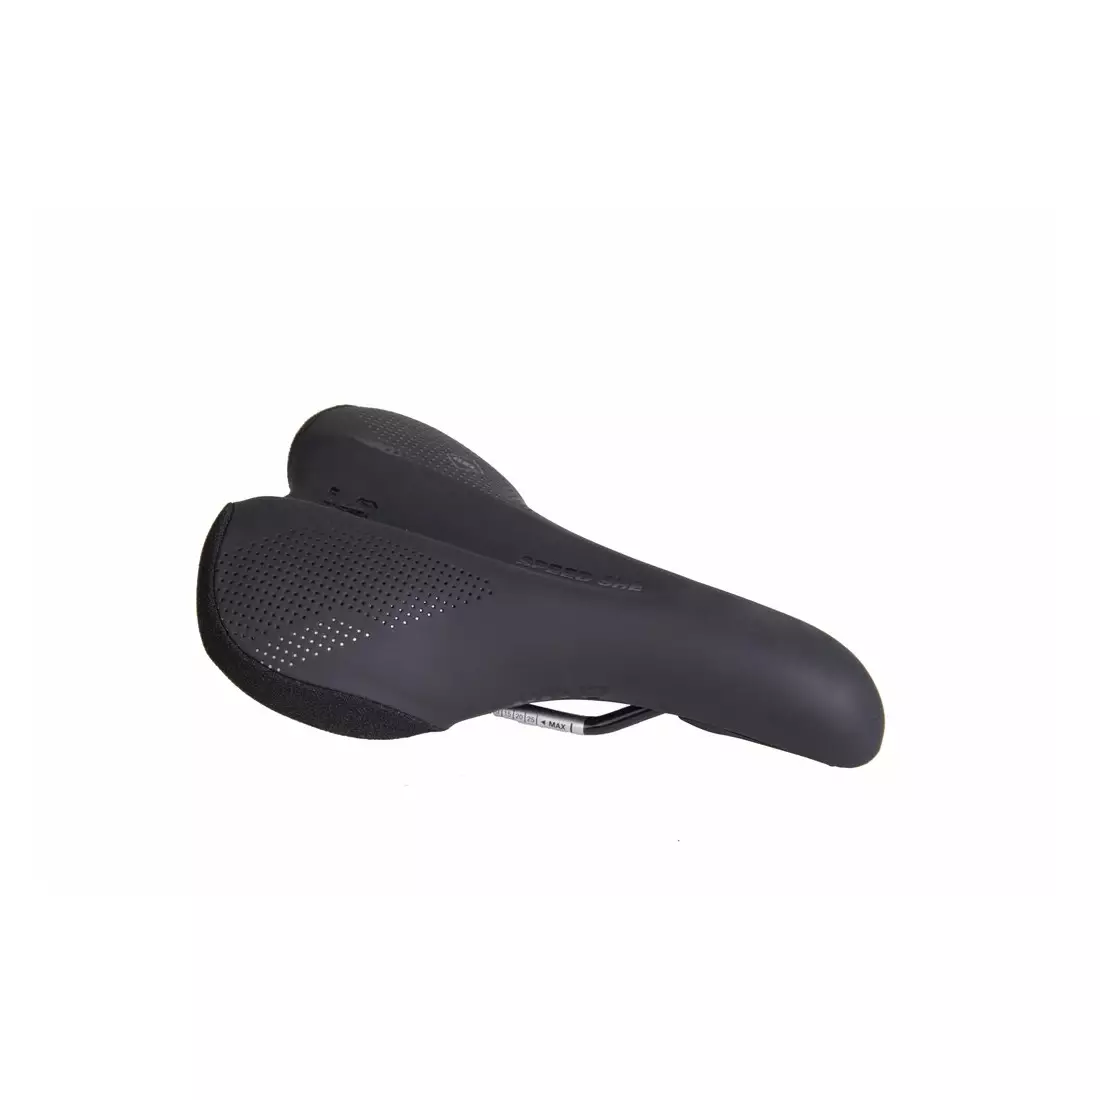 WTB women's bicycle seat SPEED SHE Cromoly wide black